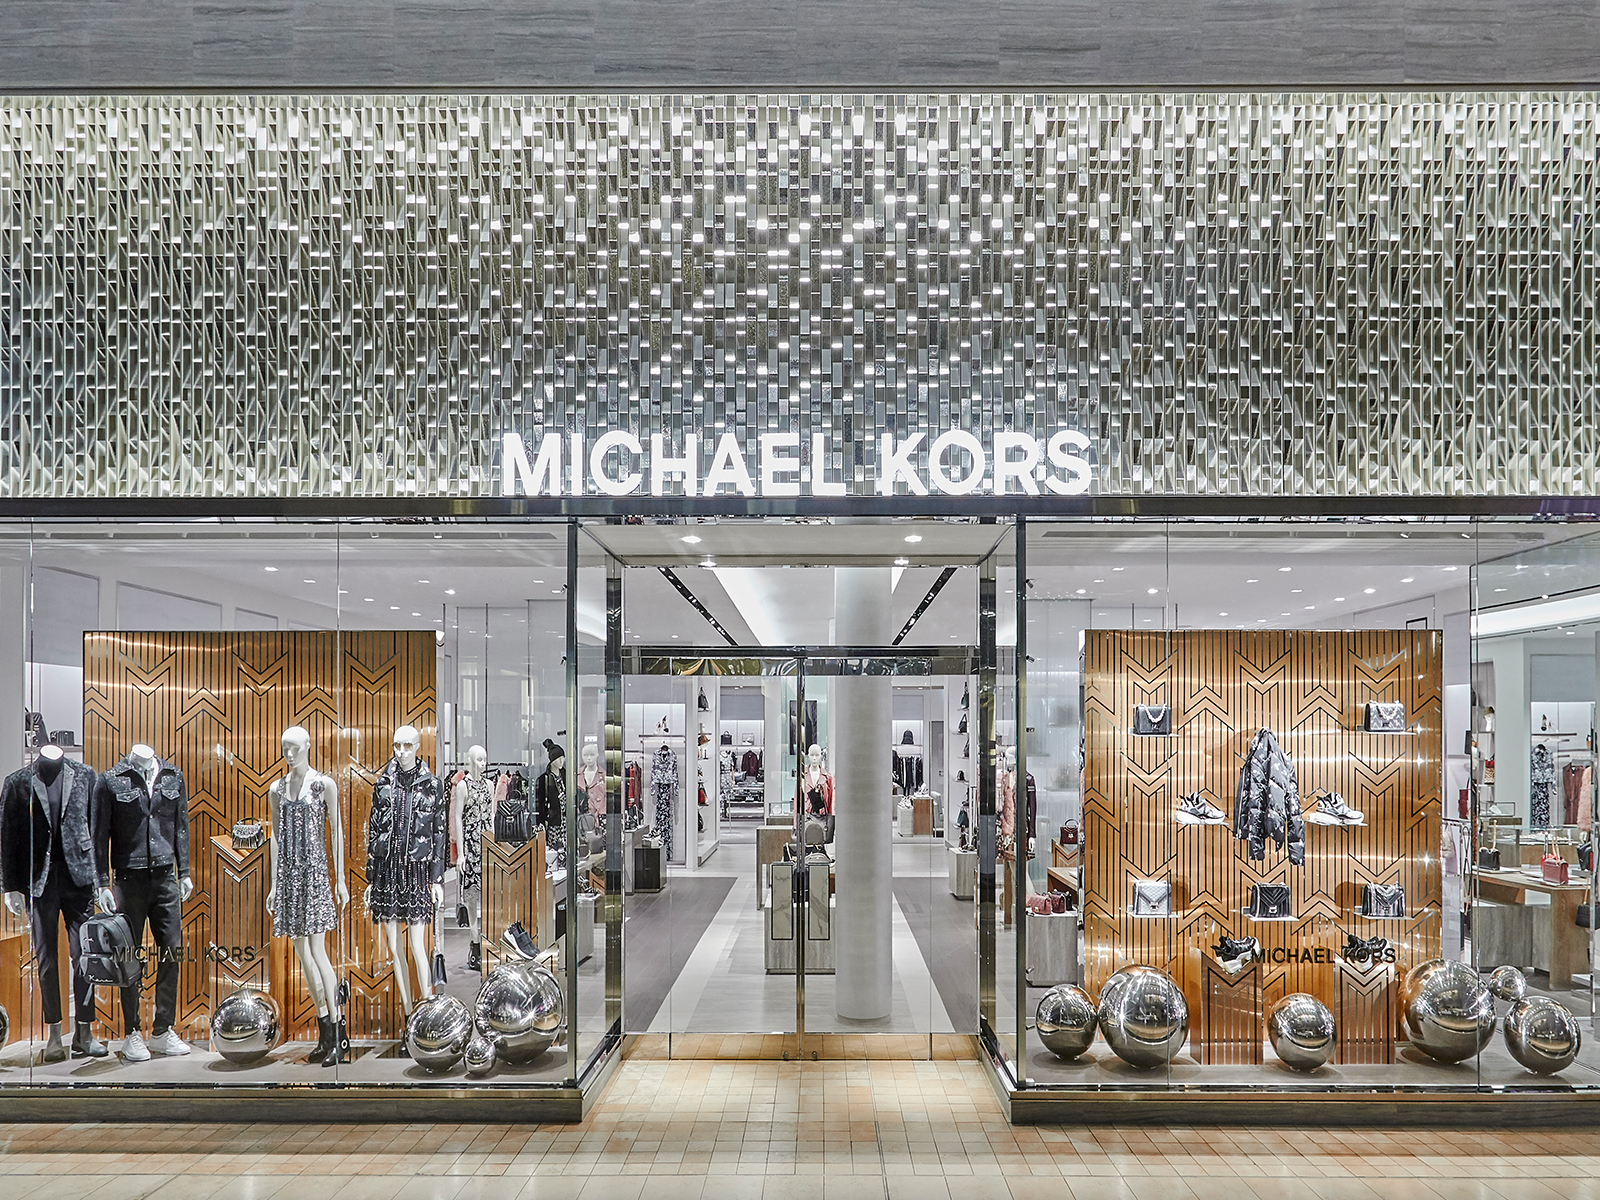 S/ Was There: Michael Kors Opens Yorkdale Remodelled Store - S/ magazine